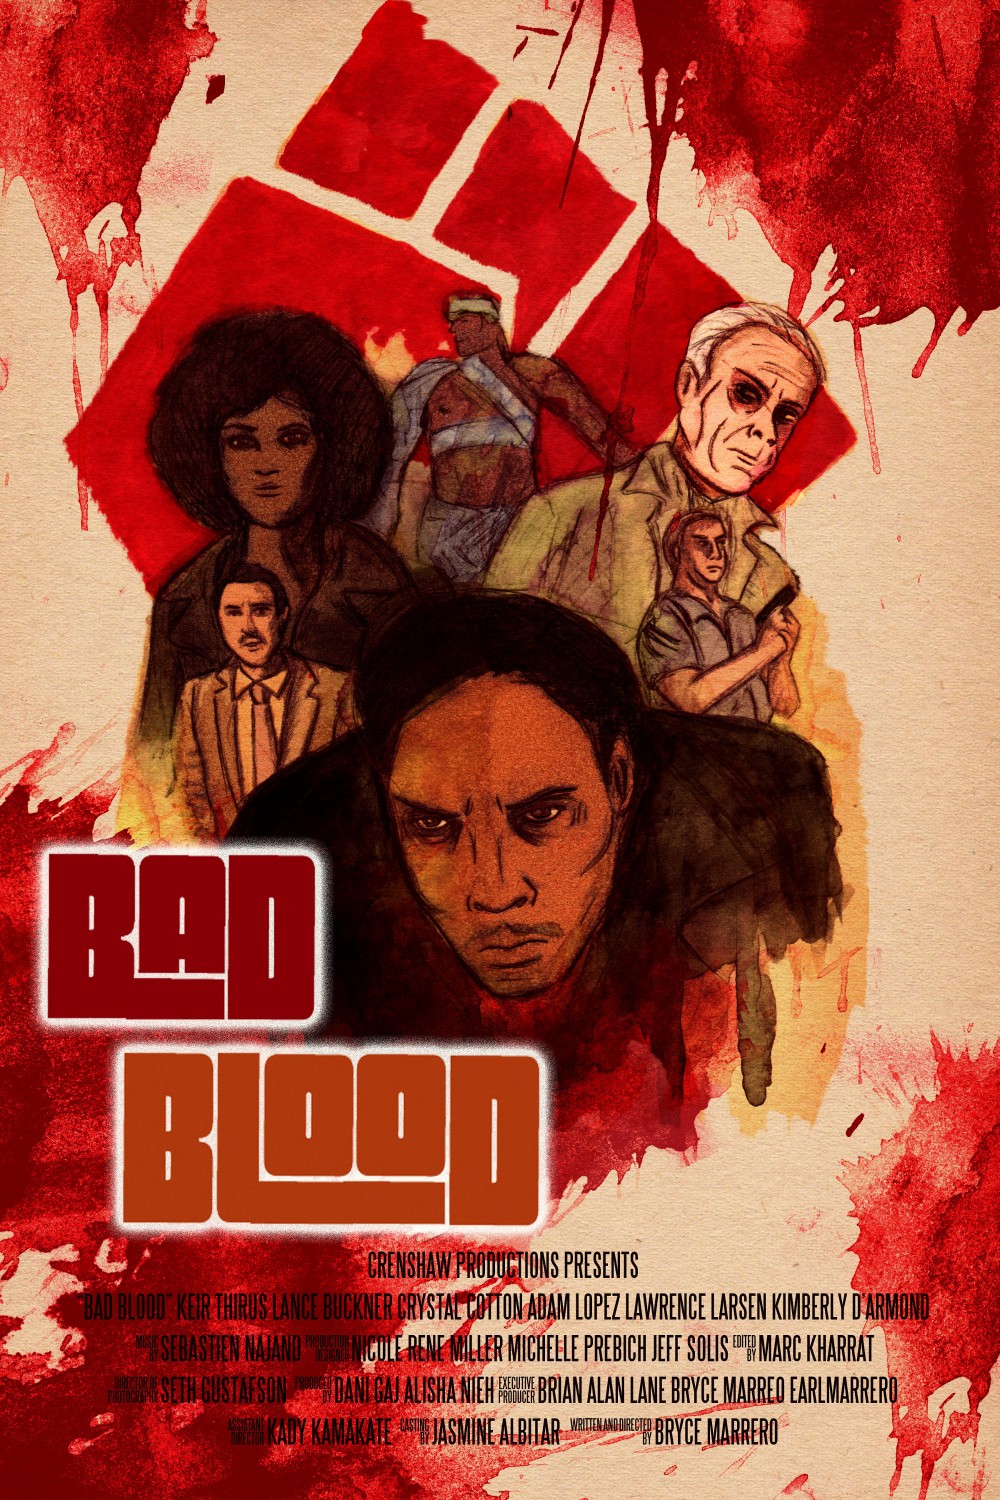 Extra Large Movie Poster Image for Bad Blood